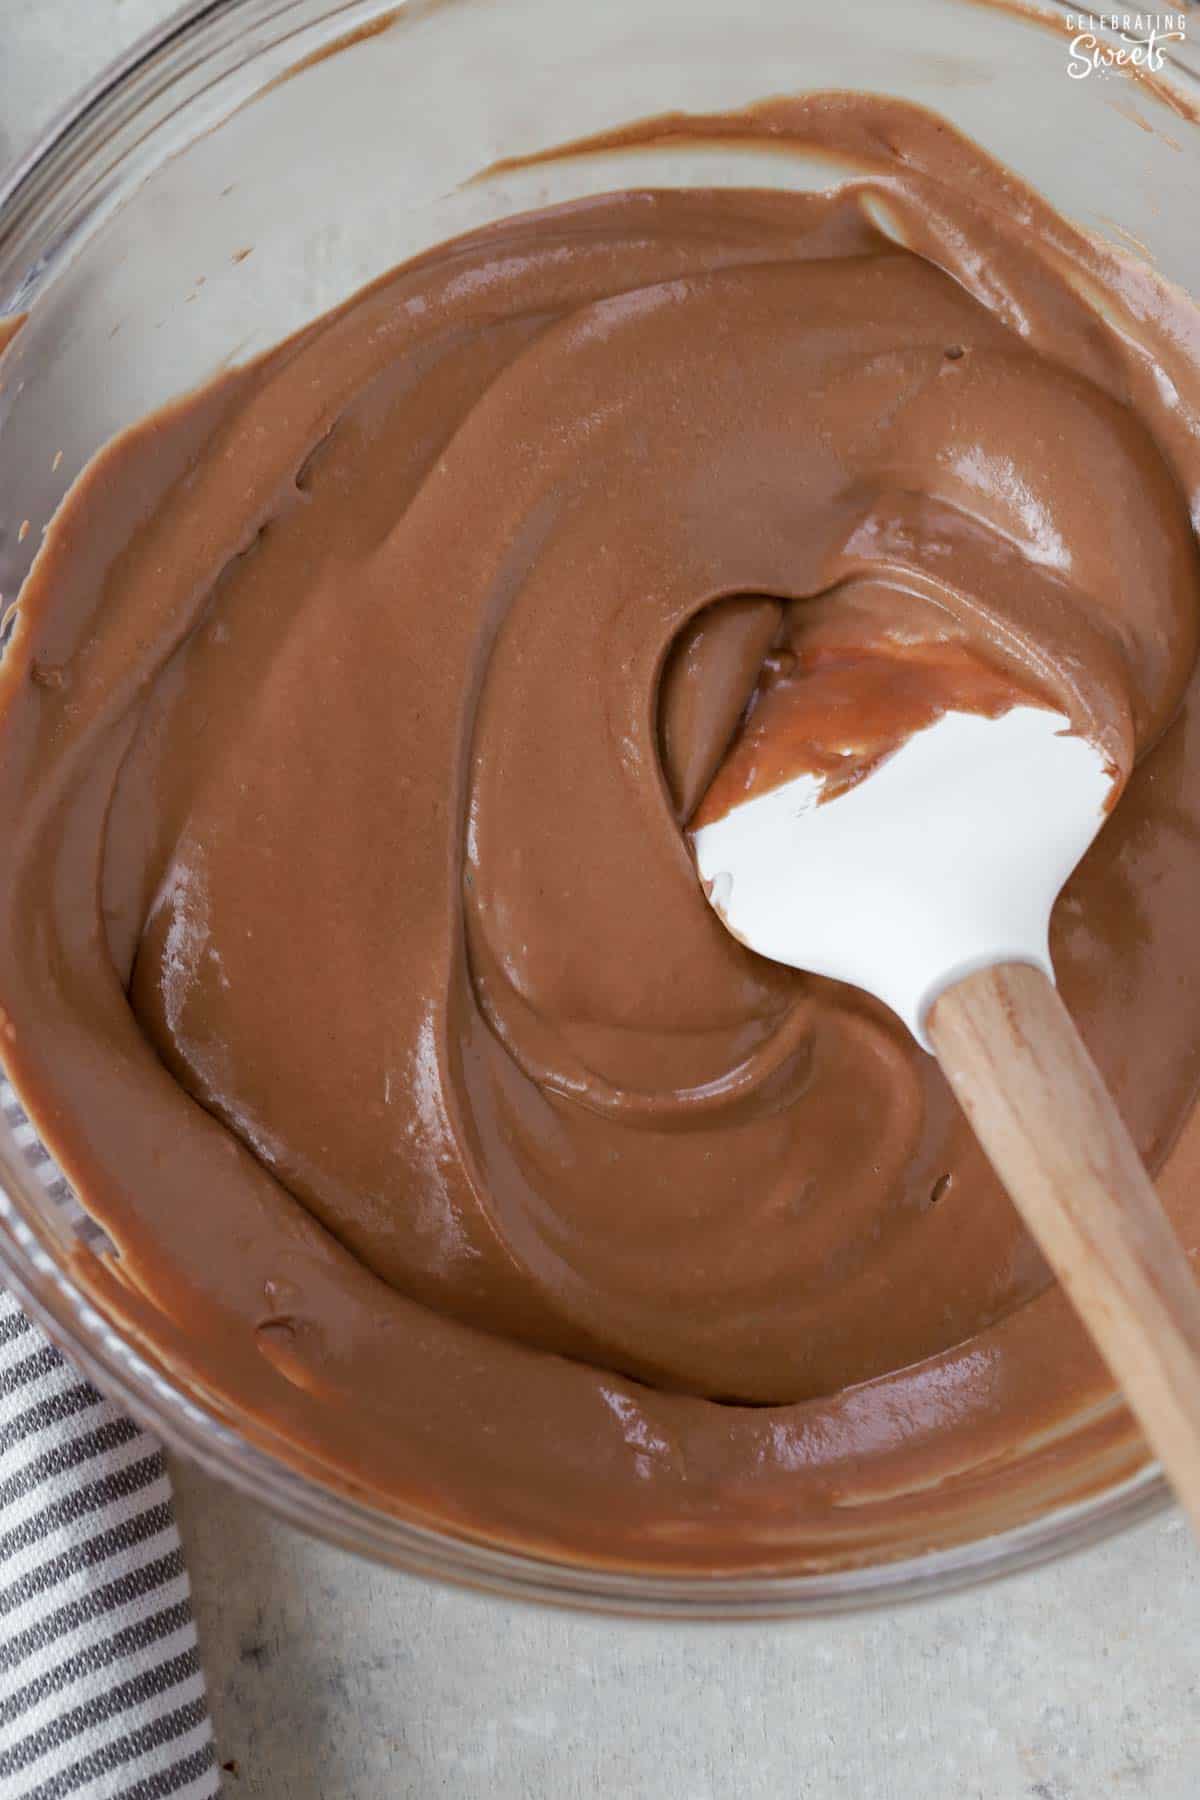 Creamy chocolate mousse in a glass bowl with a white spatula.